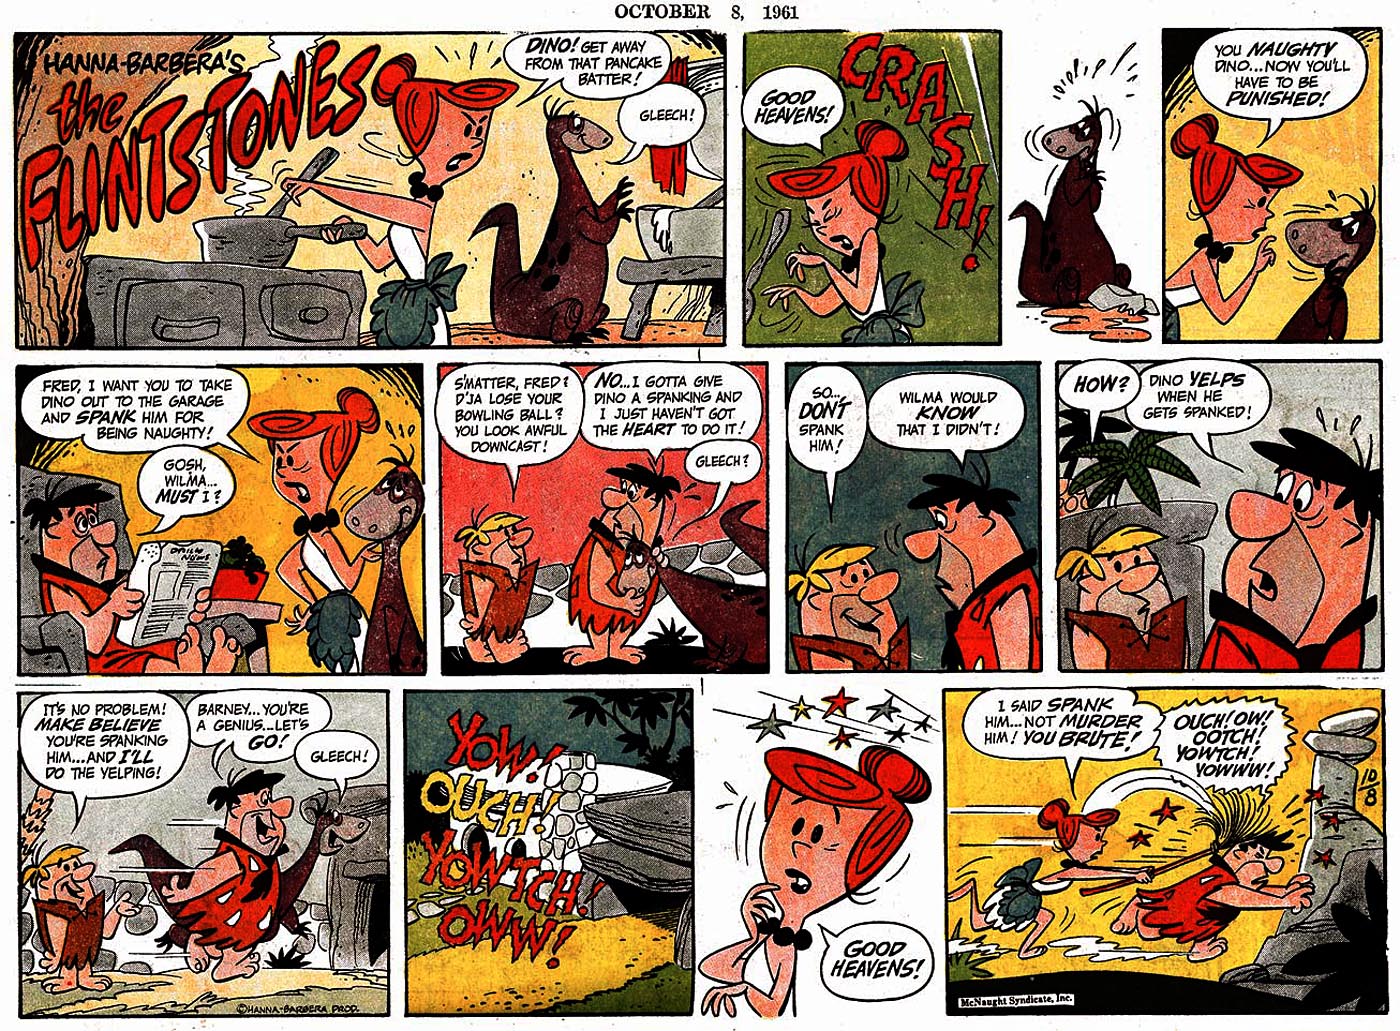 Comic Strip Pictures - How To Create A Comic Strip In 6 Steps ...